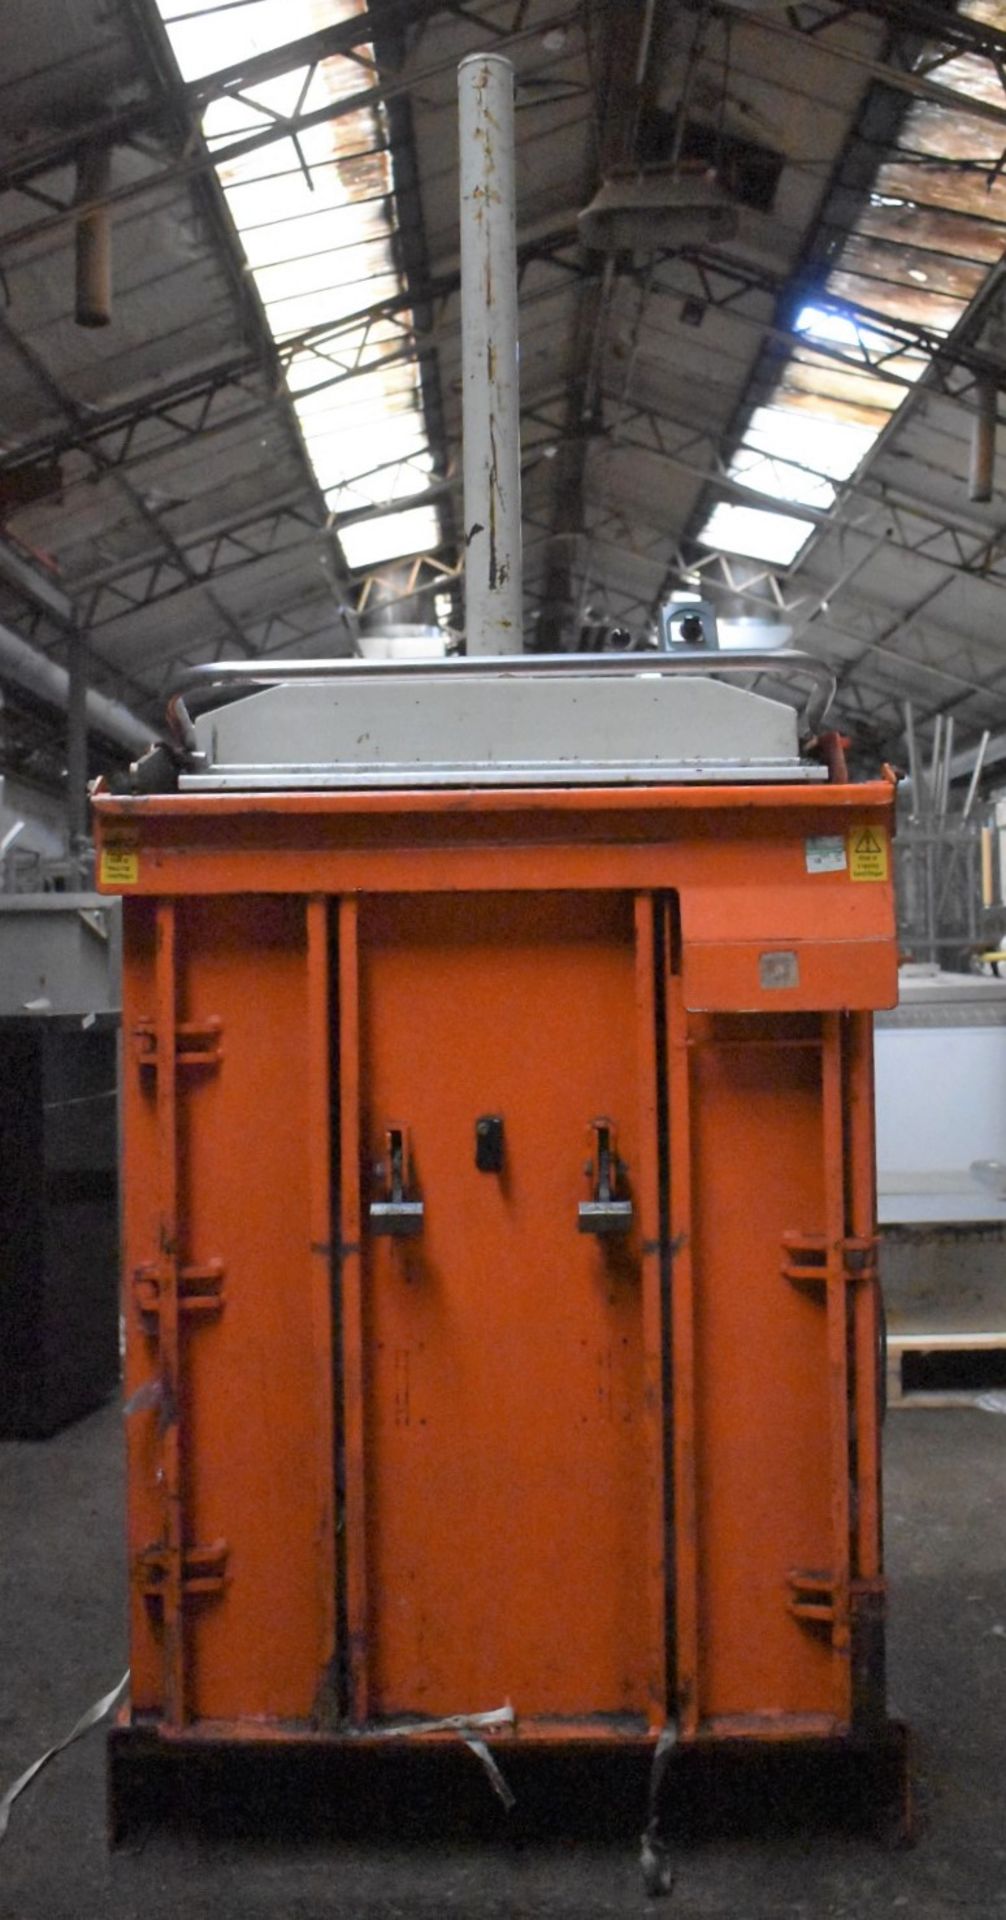 1 x Orwak 5010 Hydraulic Press Compact Cardboard Baler - Used For Compacting Recyclable or Non- - Image 10 of 15